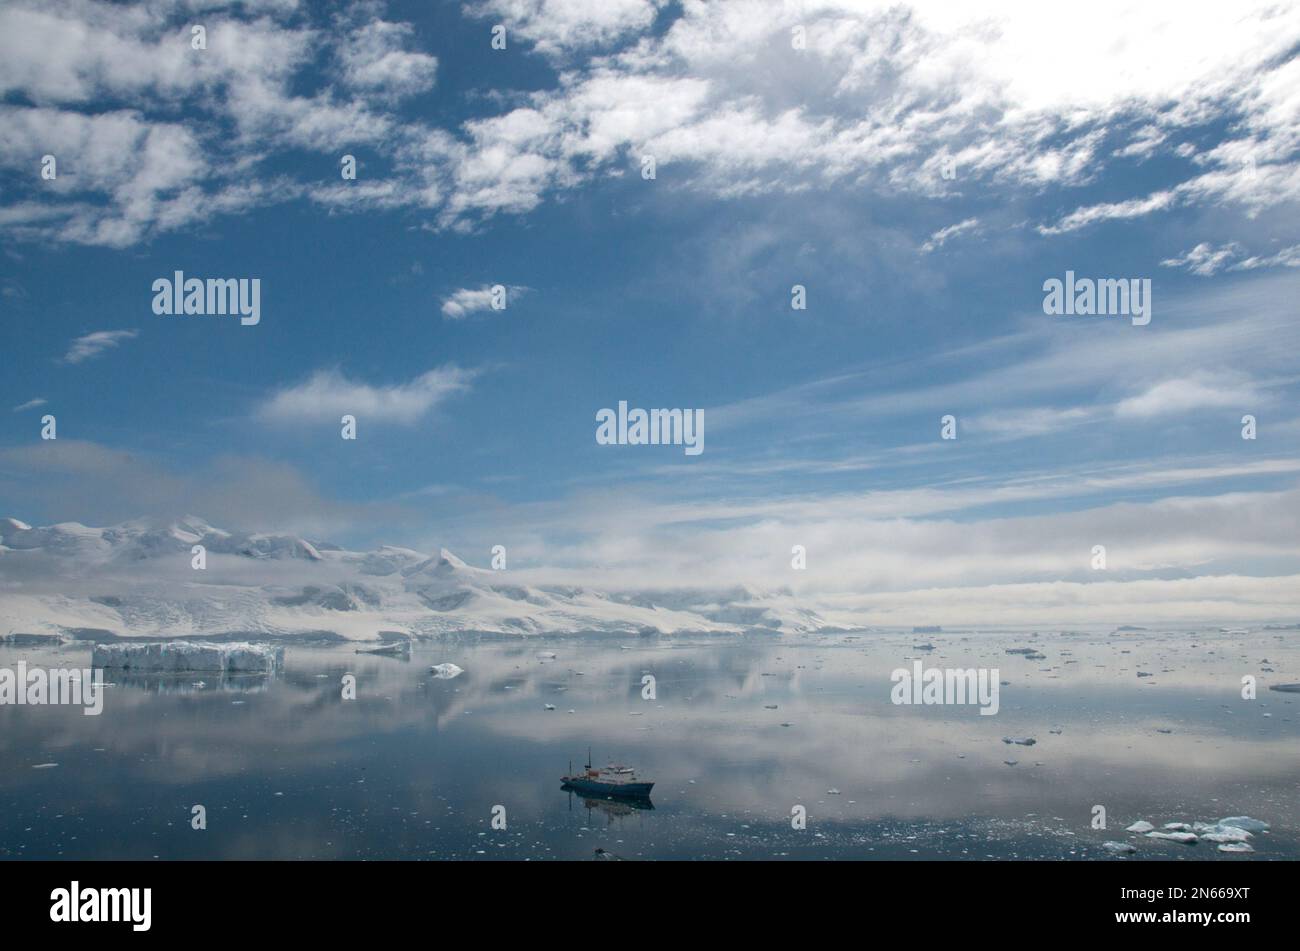 Antarctica view with ship in the distance Stock Photo